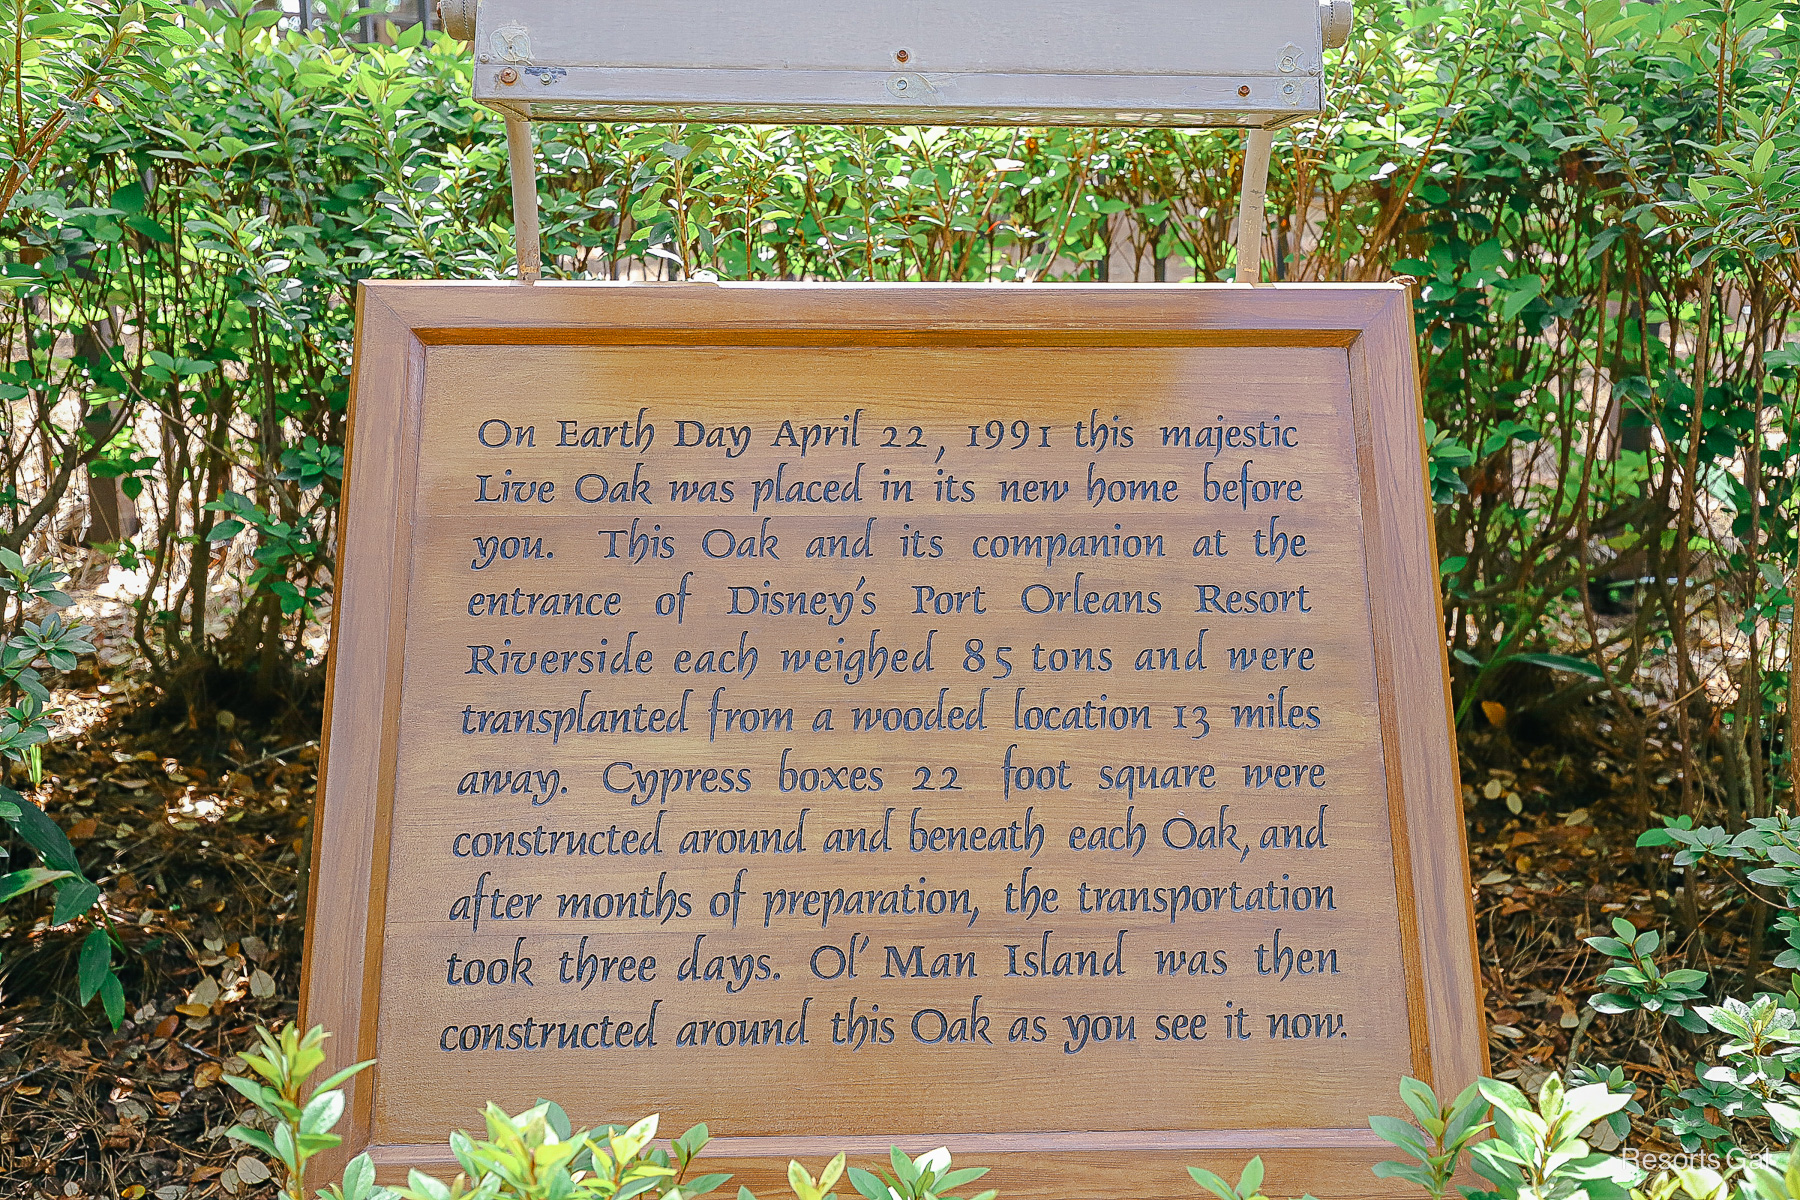 the sign tells how the tree was planted in honor of Earth Day 